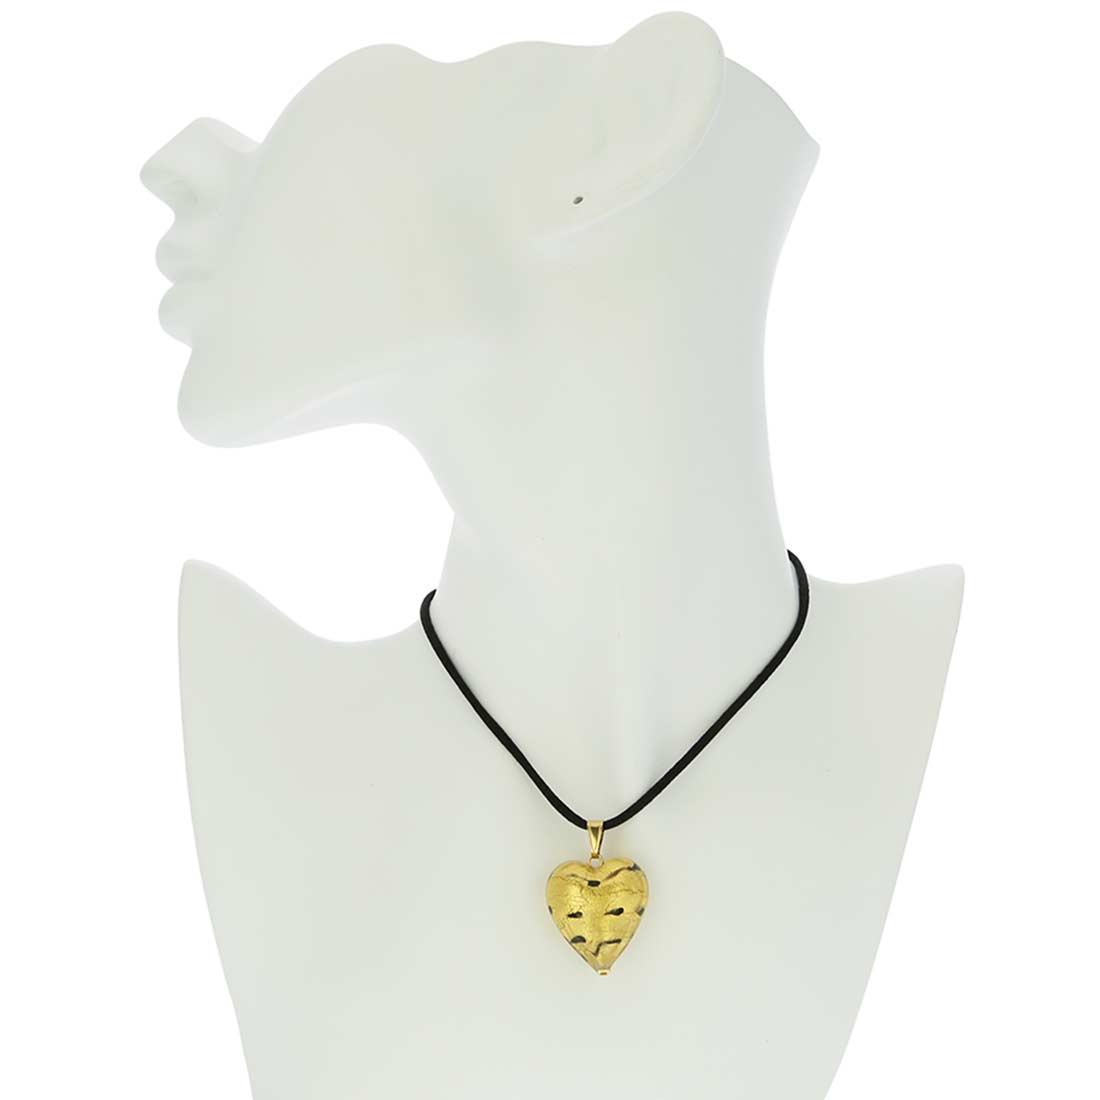 Murano Heart Pendant - Spotted Gold